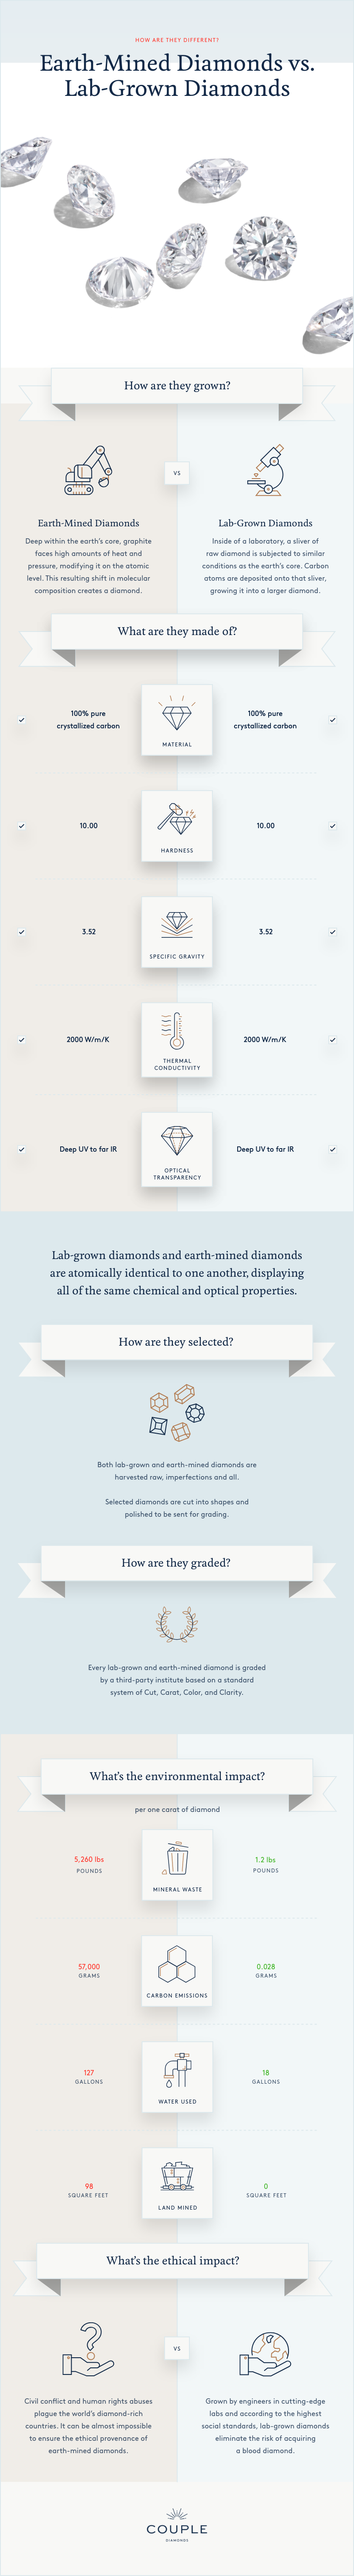 How are they different? Earth-Mined Diamonds vs. Lab-Grown Diamonds -- How are they grown? EARTH-MINED DIAMONDS Deep within the earth’s core, graphite faces high amounts of heat and pressure, modifying it on the atomic level. This resulting shift in molecular composition creates a diamond. LAB-GROWN DIAMONDS Inside of a laboratory, a sliver of  raw diamond is subjected to similar conditions as the earth’s core. Carbon atoms are deposited onto that sliver, growing it into a larger diamond." -- "What are they made of? Earth-Mined and Lab-Grown Diamonds are atomically identical. MATERIAL: 100% pure crystallized carbon. HARDNESS: 10.00. SPECIFIC GRAVITY: 3.52. THERMAL CONDUCTIVITY: 2000 W/m/K. OPTICAL TRANSPARENCY: Deep ultraviolet to far infrared." --  Lab-grown diamonds and earth-mined diamonds  are atomically identical to one another, displaying  all of the same chemical and optical properties. -- How are they selected? Both lab-grown and earth-mined diamonds are harvested raw, imperfections and all.   Selected diamonds are cut into shapes and polished to be sent for grading. How are they graded? Every lab-grown and earth-mined diamond is graded  by a third-party institute based on a standard system of Cut, Carat, Color, and Clarity." -- "What's the environmental impact? PER ONE CARAT OF DIAMOND. Mineral Waste: 5,260 POUNDS earth-mined diamonds; 1.2 POUNDS lab-grown diamonds. Carbon Emissions: 57,000 GRAMS earth-mined diamonds; 0.028 GRAMS lab-grown diamonds. Water Used: 127 GALLONS earth-mined diamonds; 18 GALLONS lab-grown diamonds. Land Mined: 98 SQUARE FEET earth-mined diamonds; 0 SQUARE FEET, lab-grown diamonds."  -- What's the ethical impact? EARTH-MINED DIAMONDS: Civil conflict and human rights abuses plague the world’s diamond-rich countries. It can be almost impossible to ensure the ethical provenance of earth-mined diamonds. LAB-GROWN DIAMONDS: Grown by engineers in cutting-edge labs and according to the highest social standards, lab-grown diamonds eliminate the risk of acquiring a blood diamond."